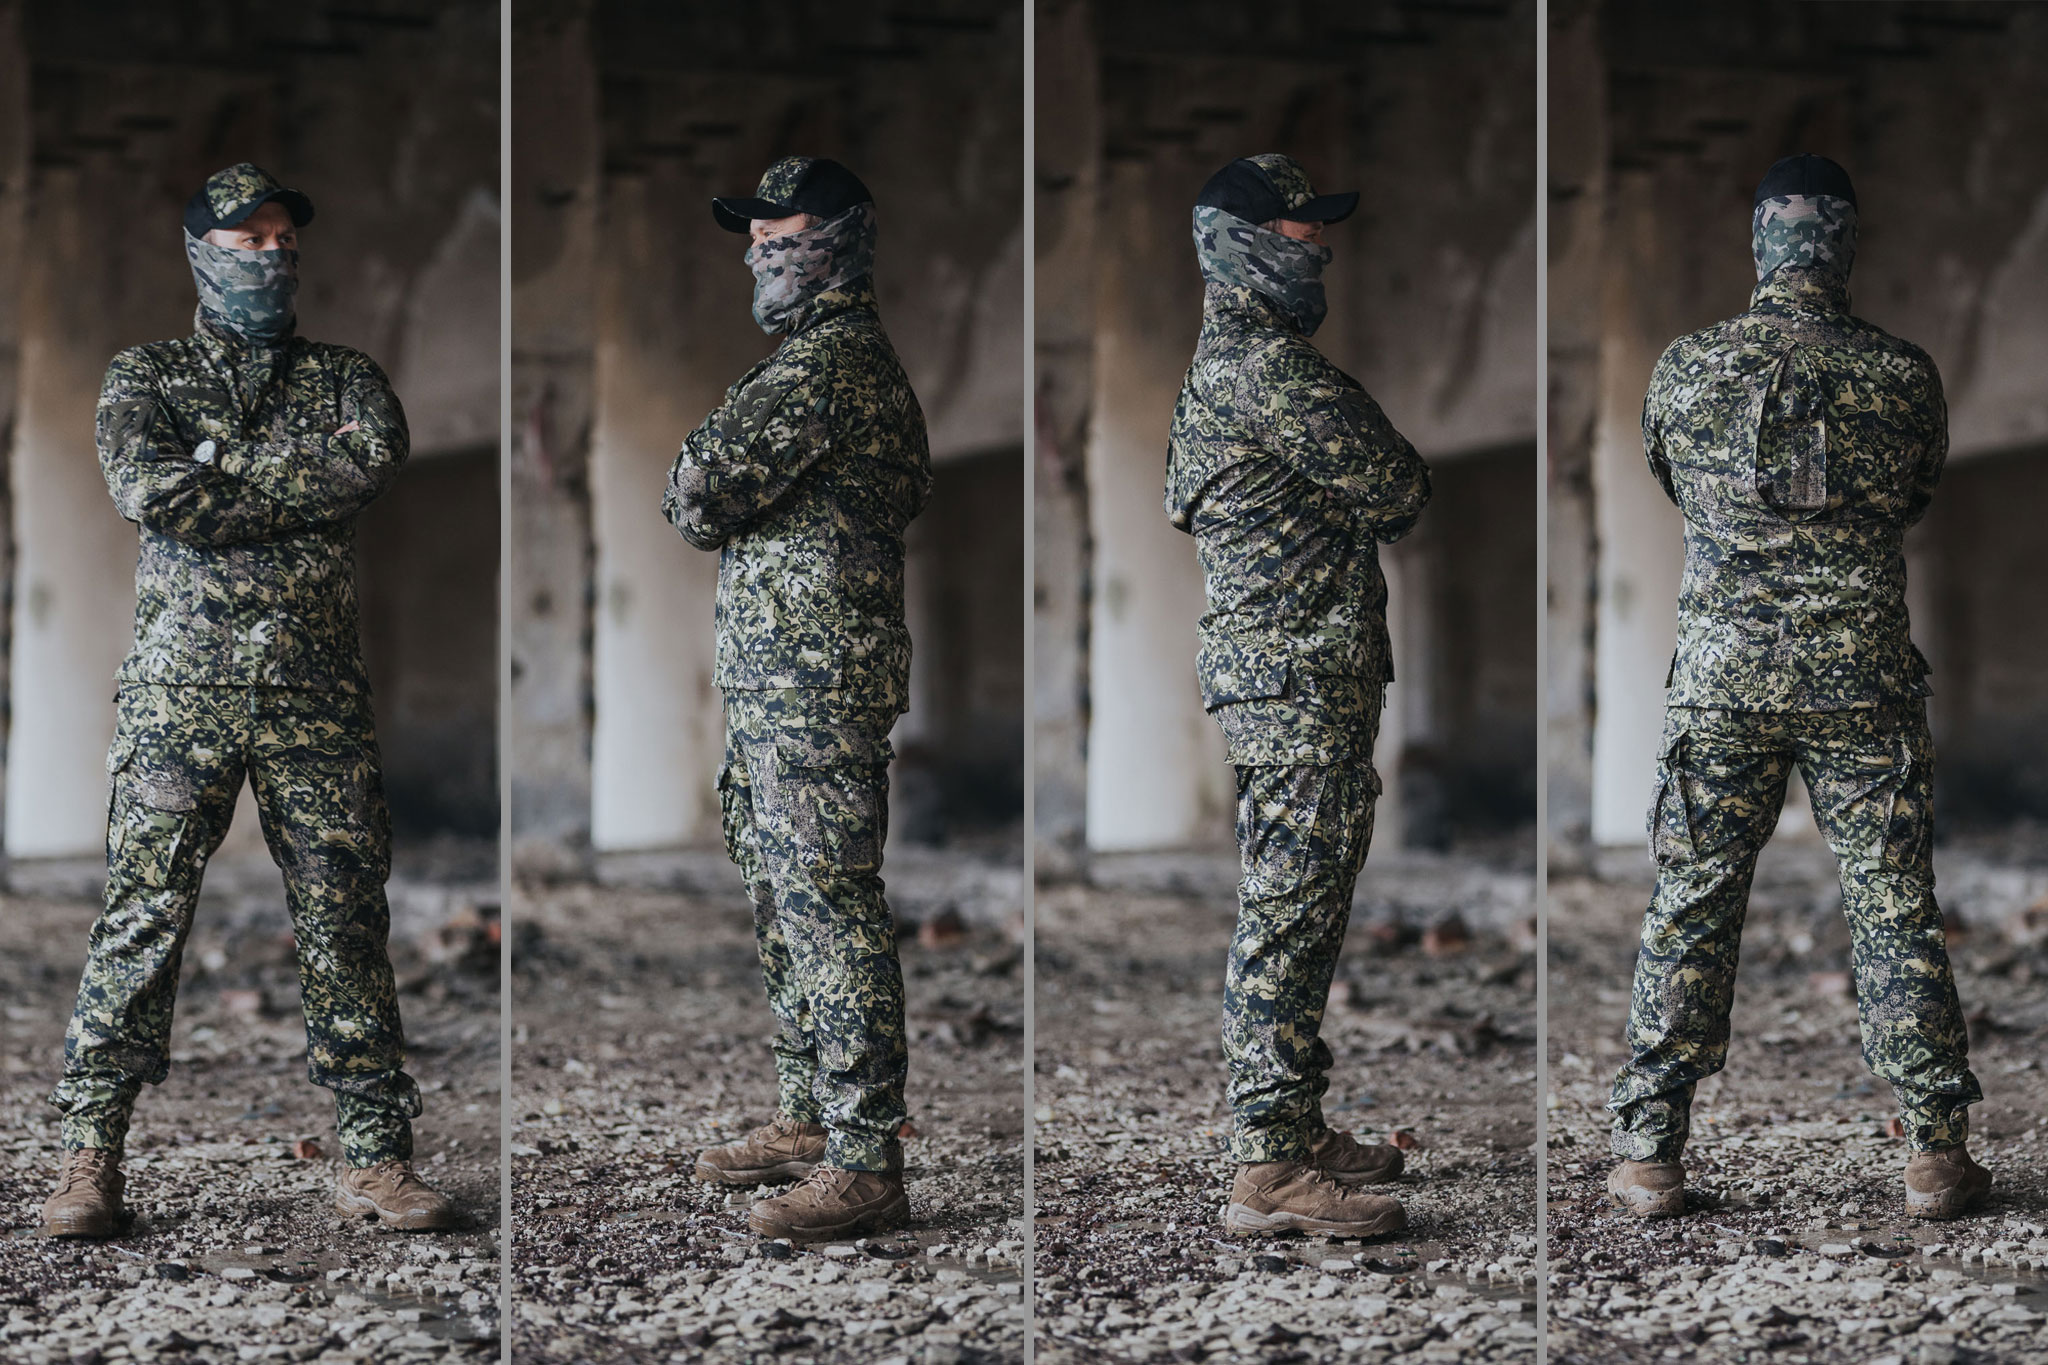 pestaña Logro Insustituible WMASG.com on Twitter: "We are presenting a brand new uniform in legendary MAPA  camouflage! Much more pics on WMASG! https://t.co/0rdpZCHoXS #wmasg  #followmasg #wmasg20 #maskpol #pgz #mapa #mapatactical #mapacamouflage  #mapacamo #camo #camouflage ...